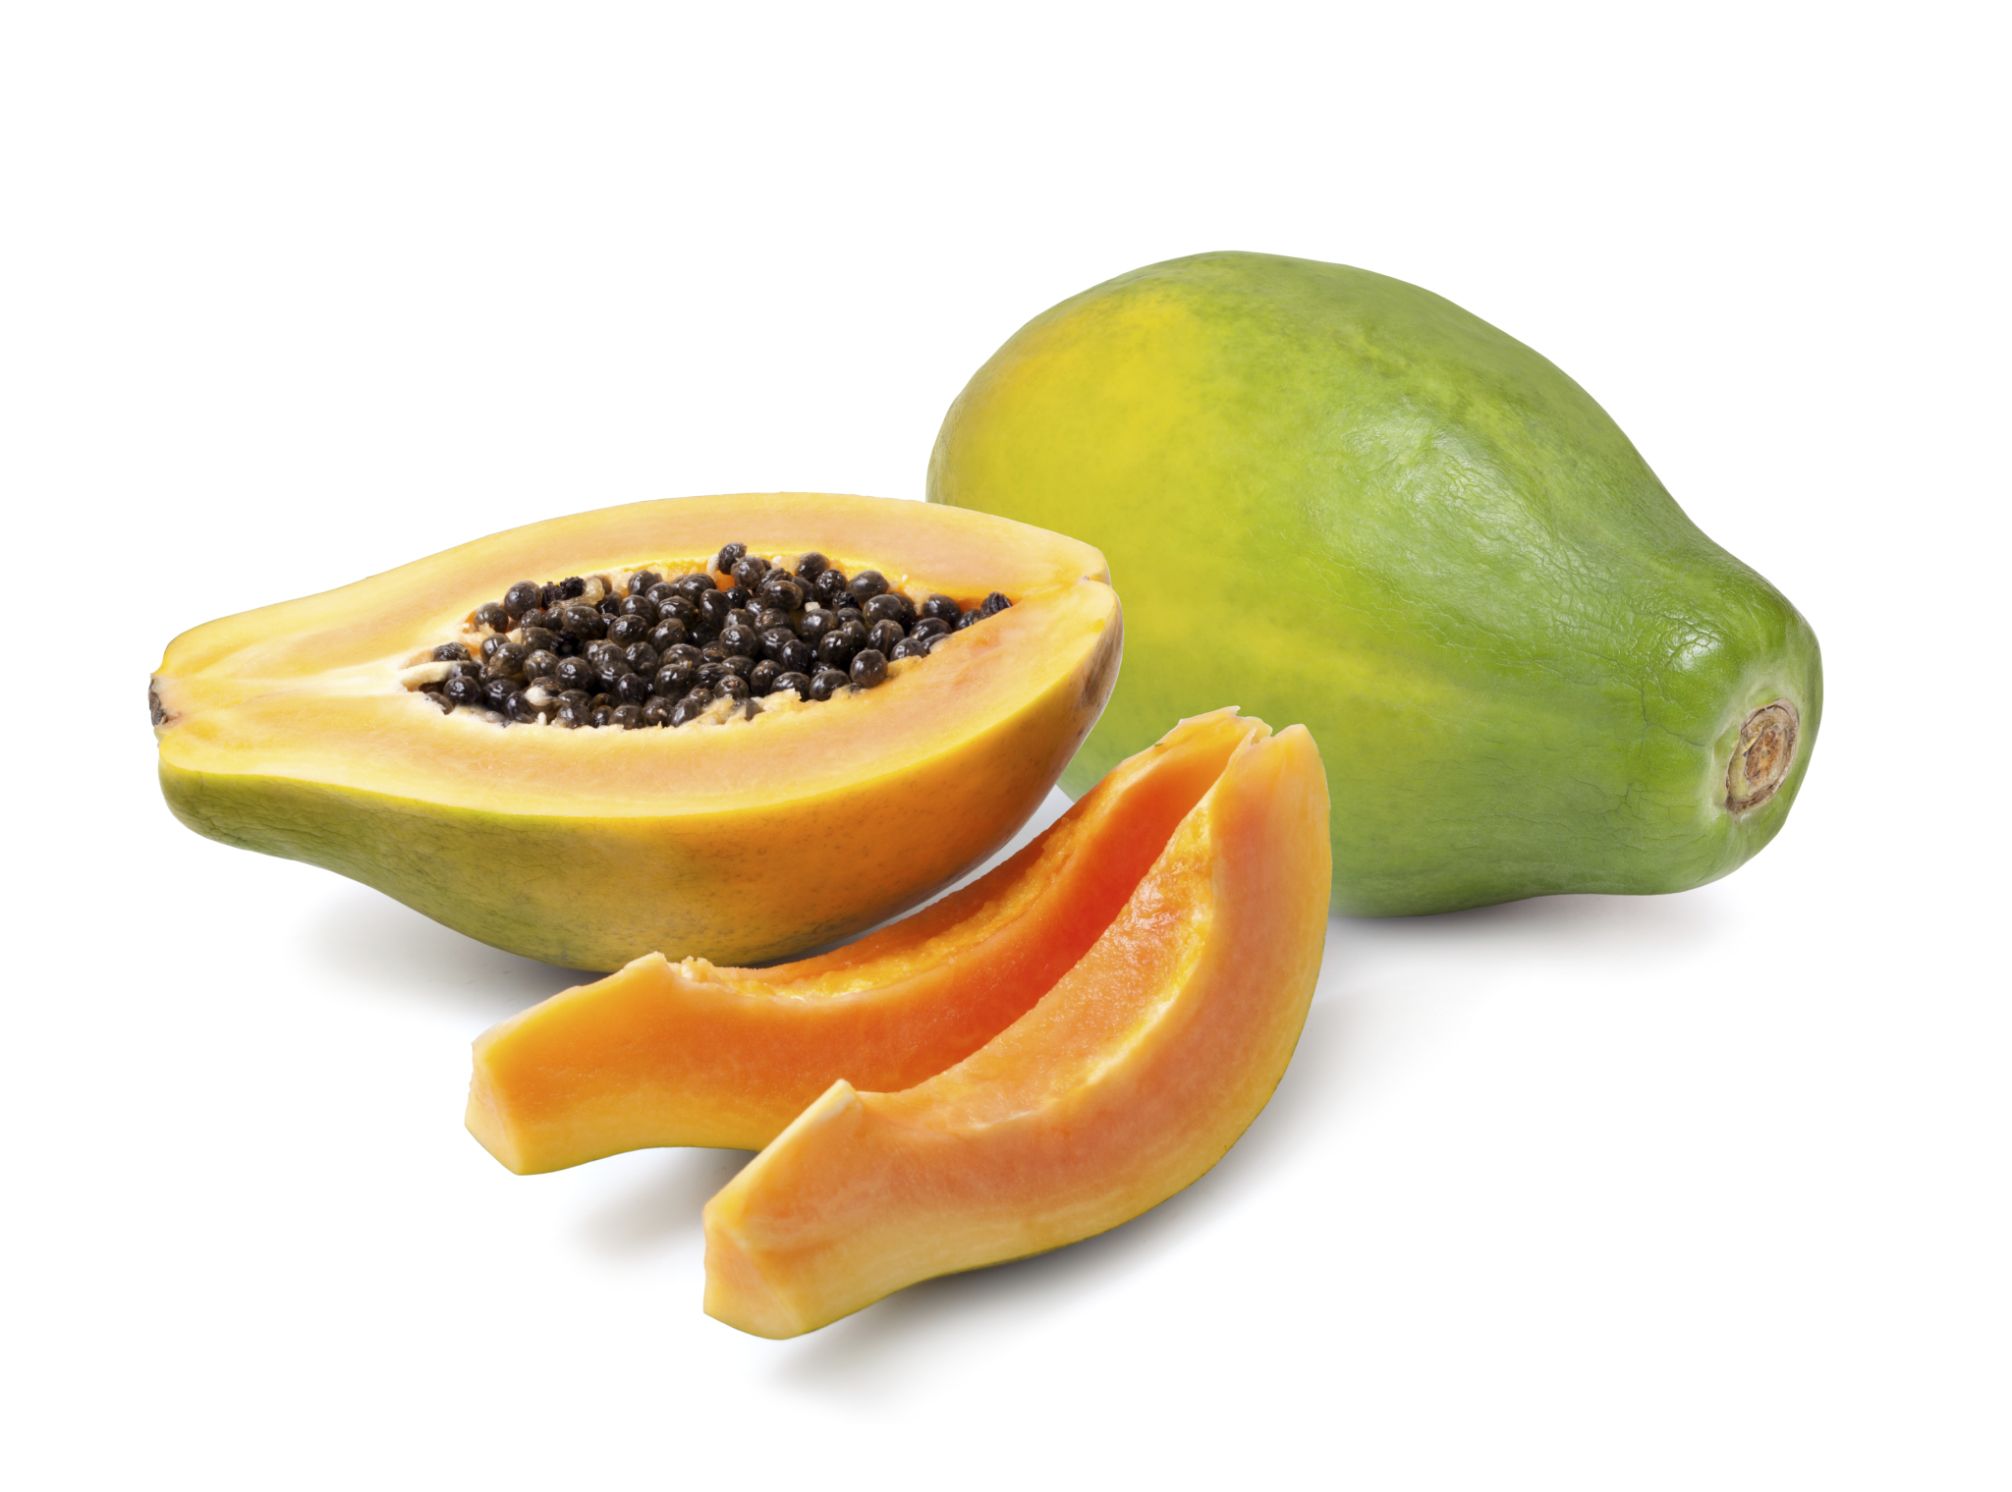 Pawpaw, some of the traditional fruit of Rosh Hashanah